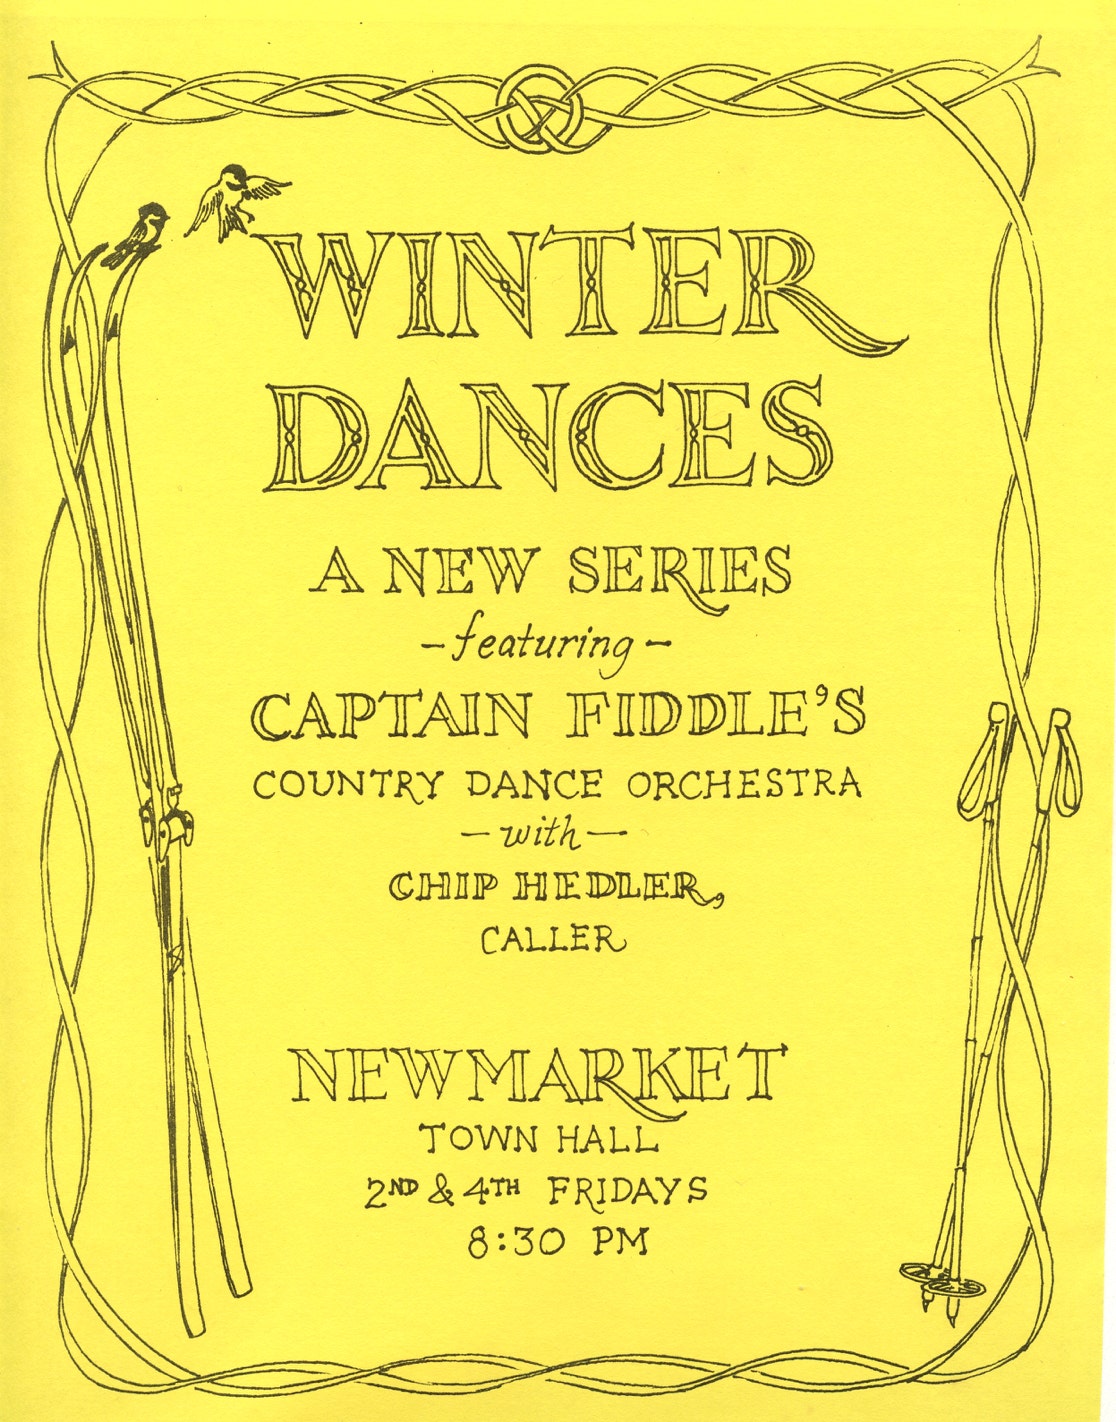 Poster for a Contra Dance, Newmarket, New Hampshire, Captain Fiddle